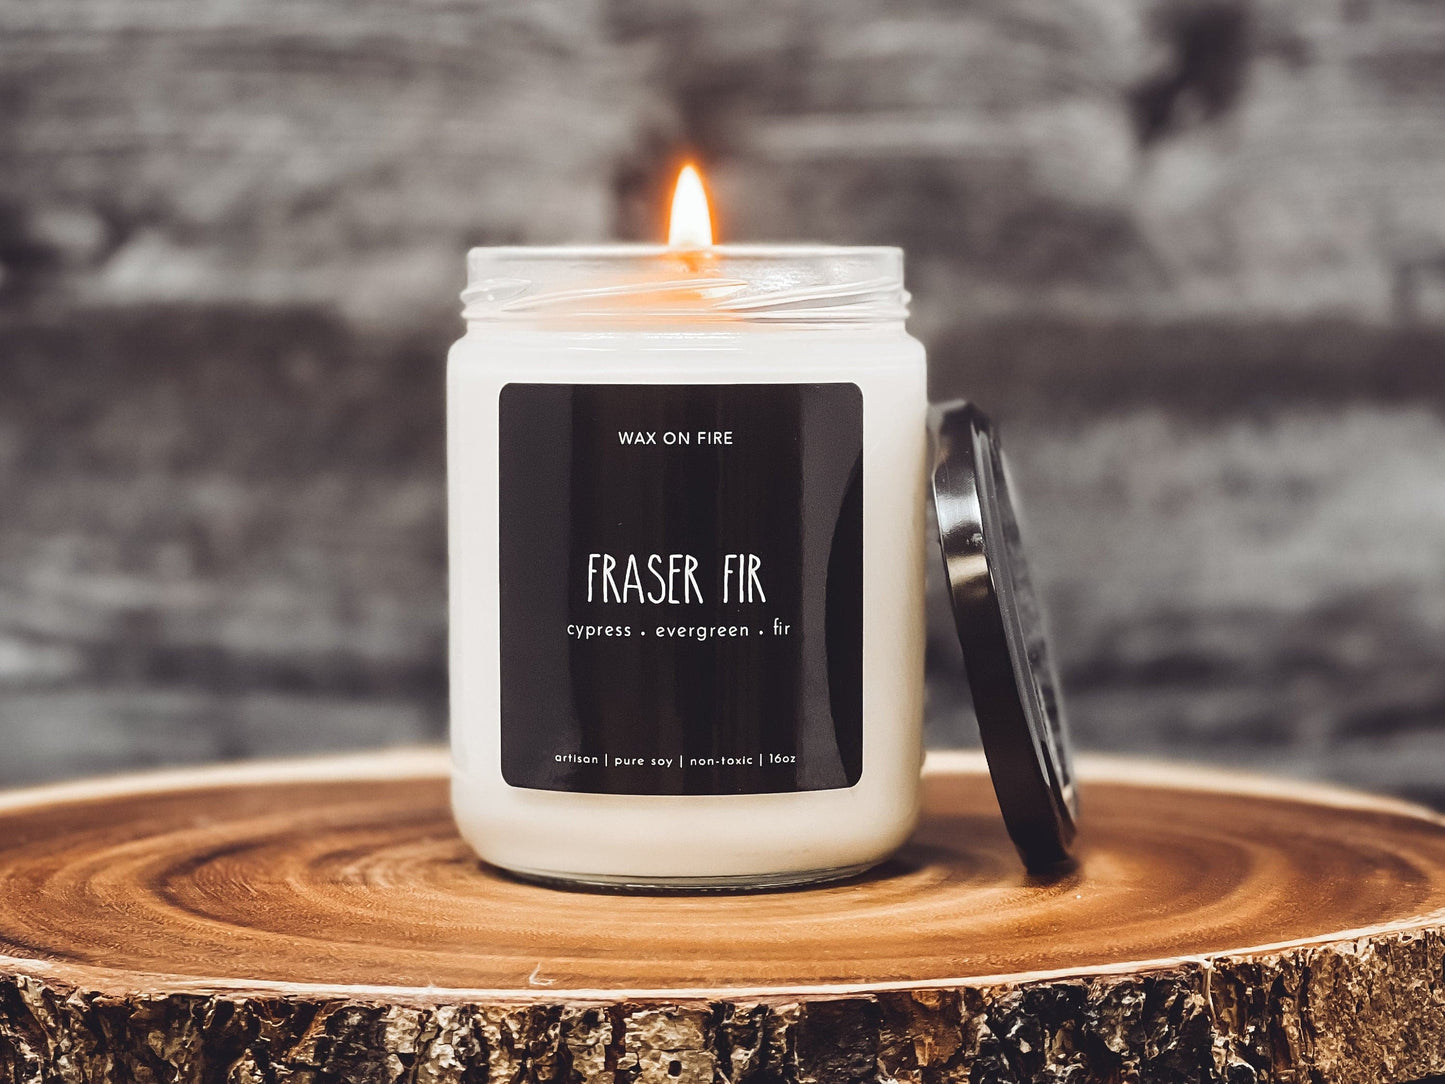 Fraser Fir | Non-Toxic Soy Candle - Wax On Fire